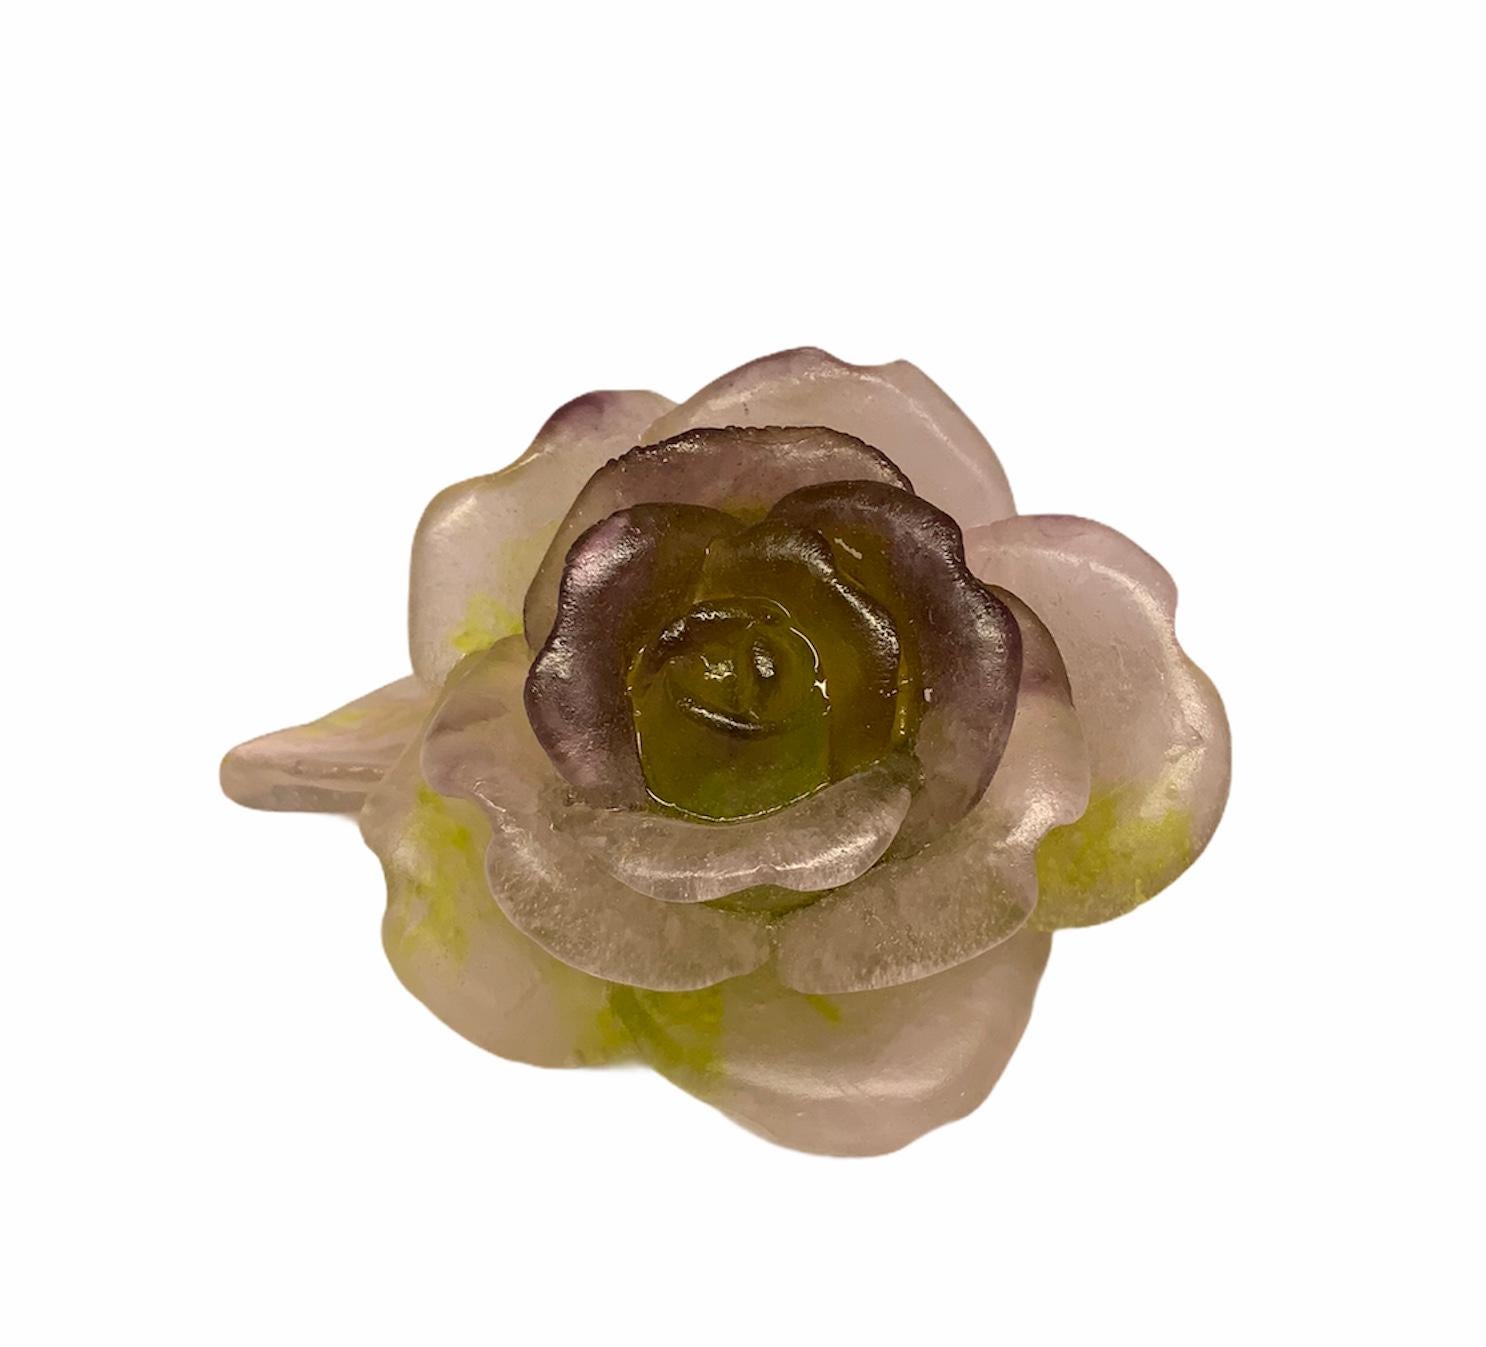 This a charming pate de verre frosted crystal rose paperweight painted in wine and green color in its petals. Under the rose is signed Daum, France. The gift of a rose, always expresses Love.